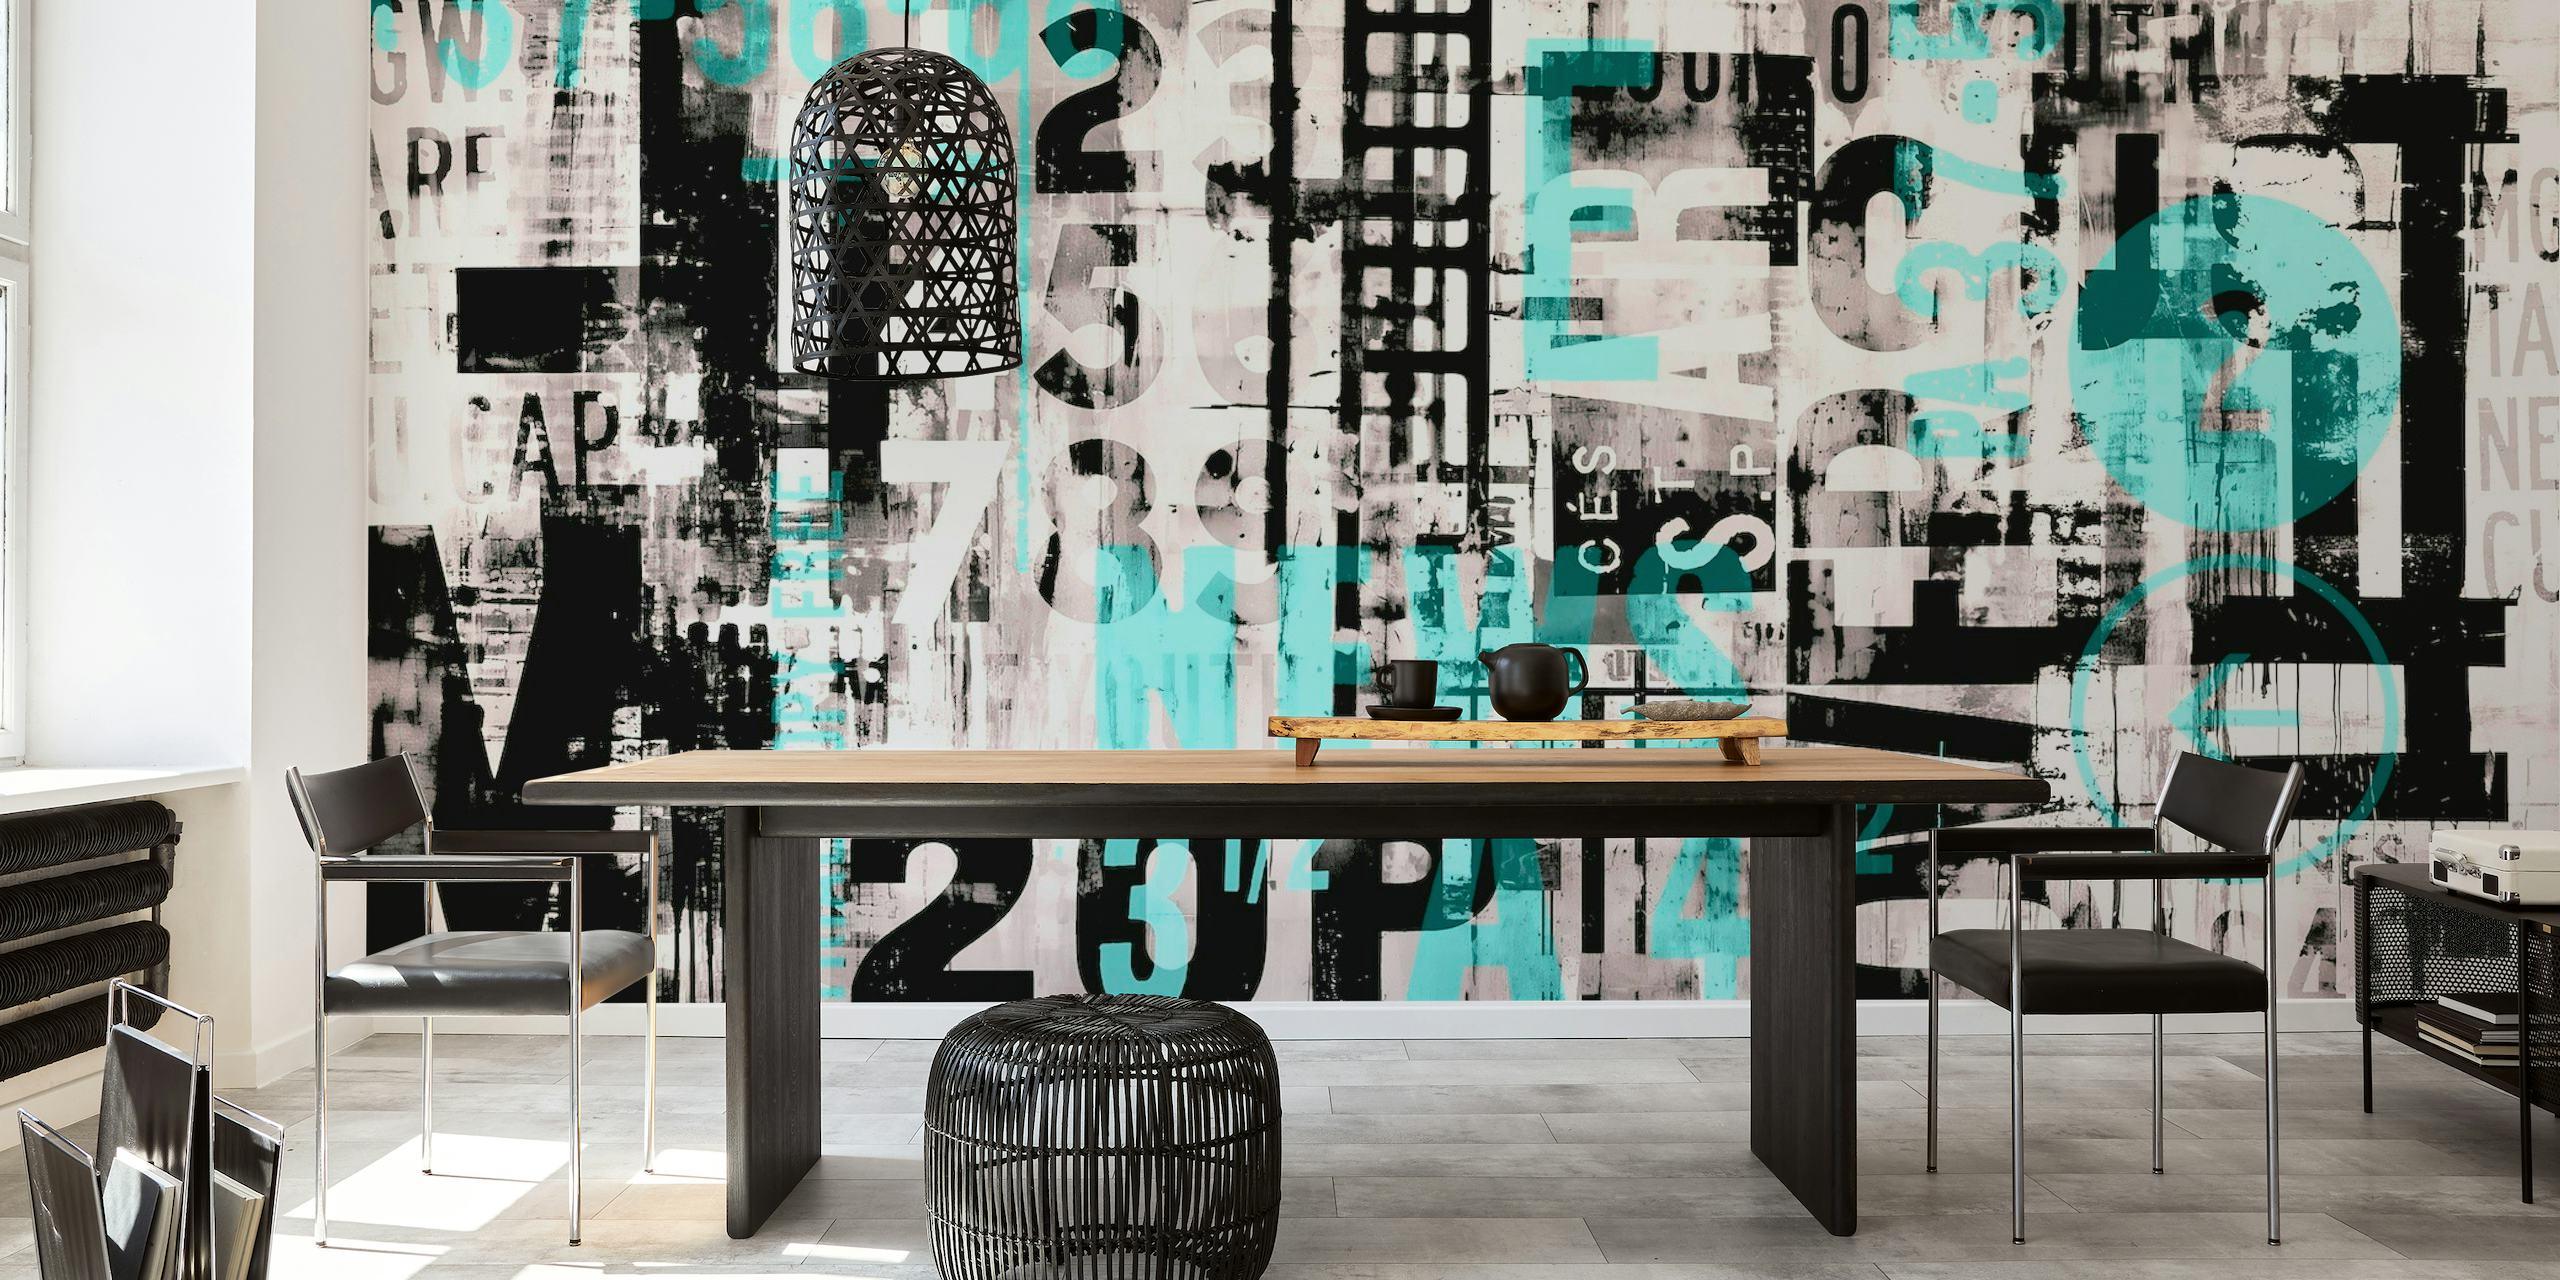 Grunge Typo Street Art Teal Wall Mural with Abstract Elements